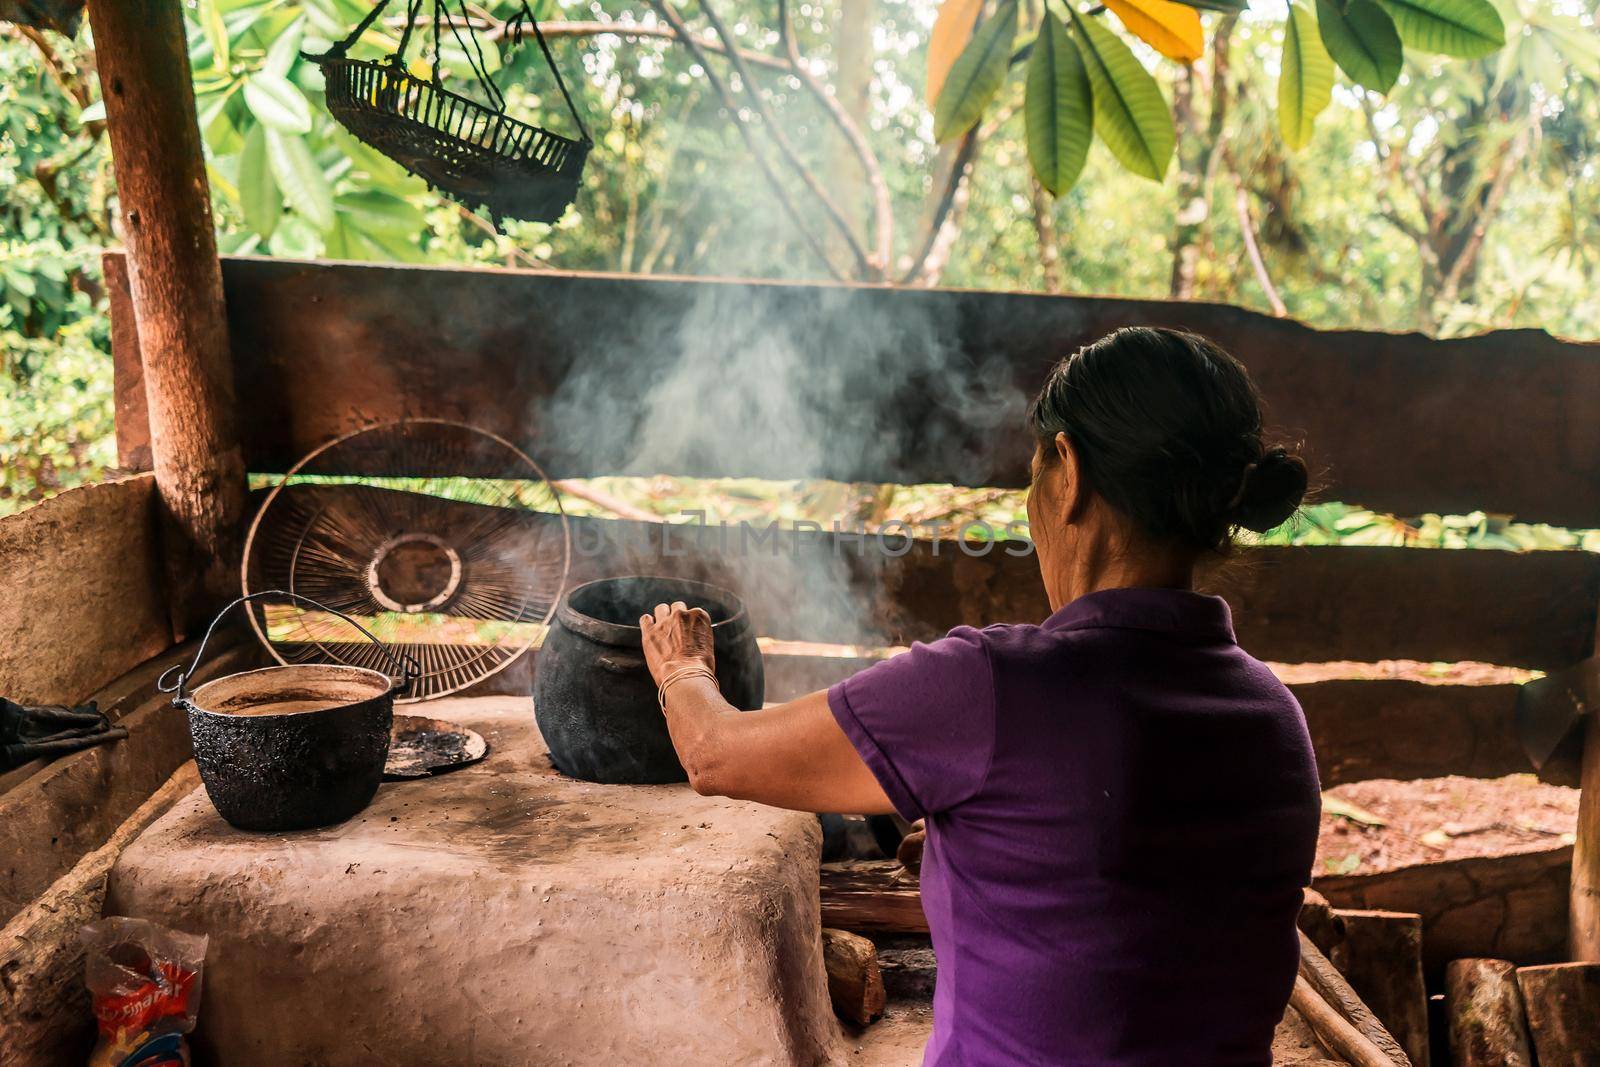 Latin grandmother with arms cooking in pots on the stove at home in Nueva Guinea Nicaragua